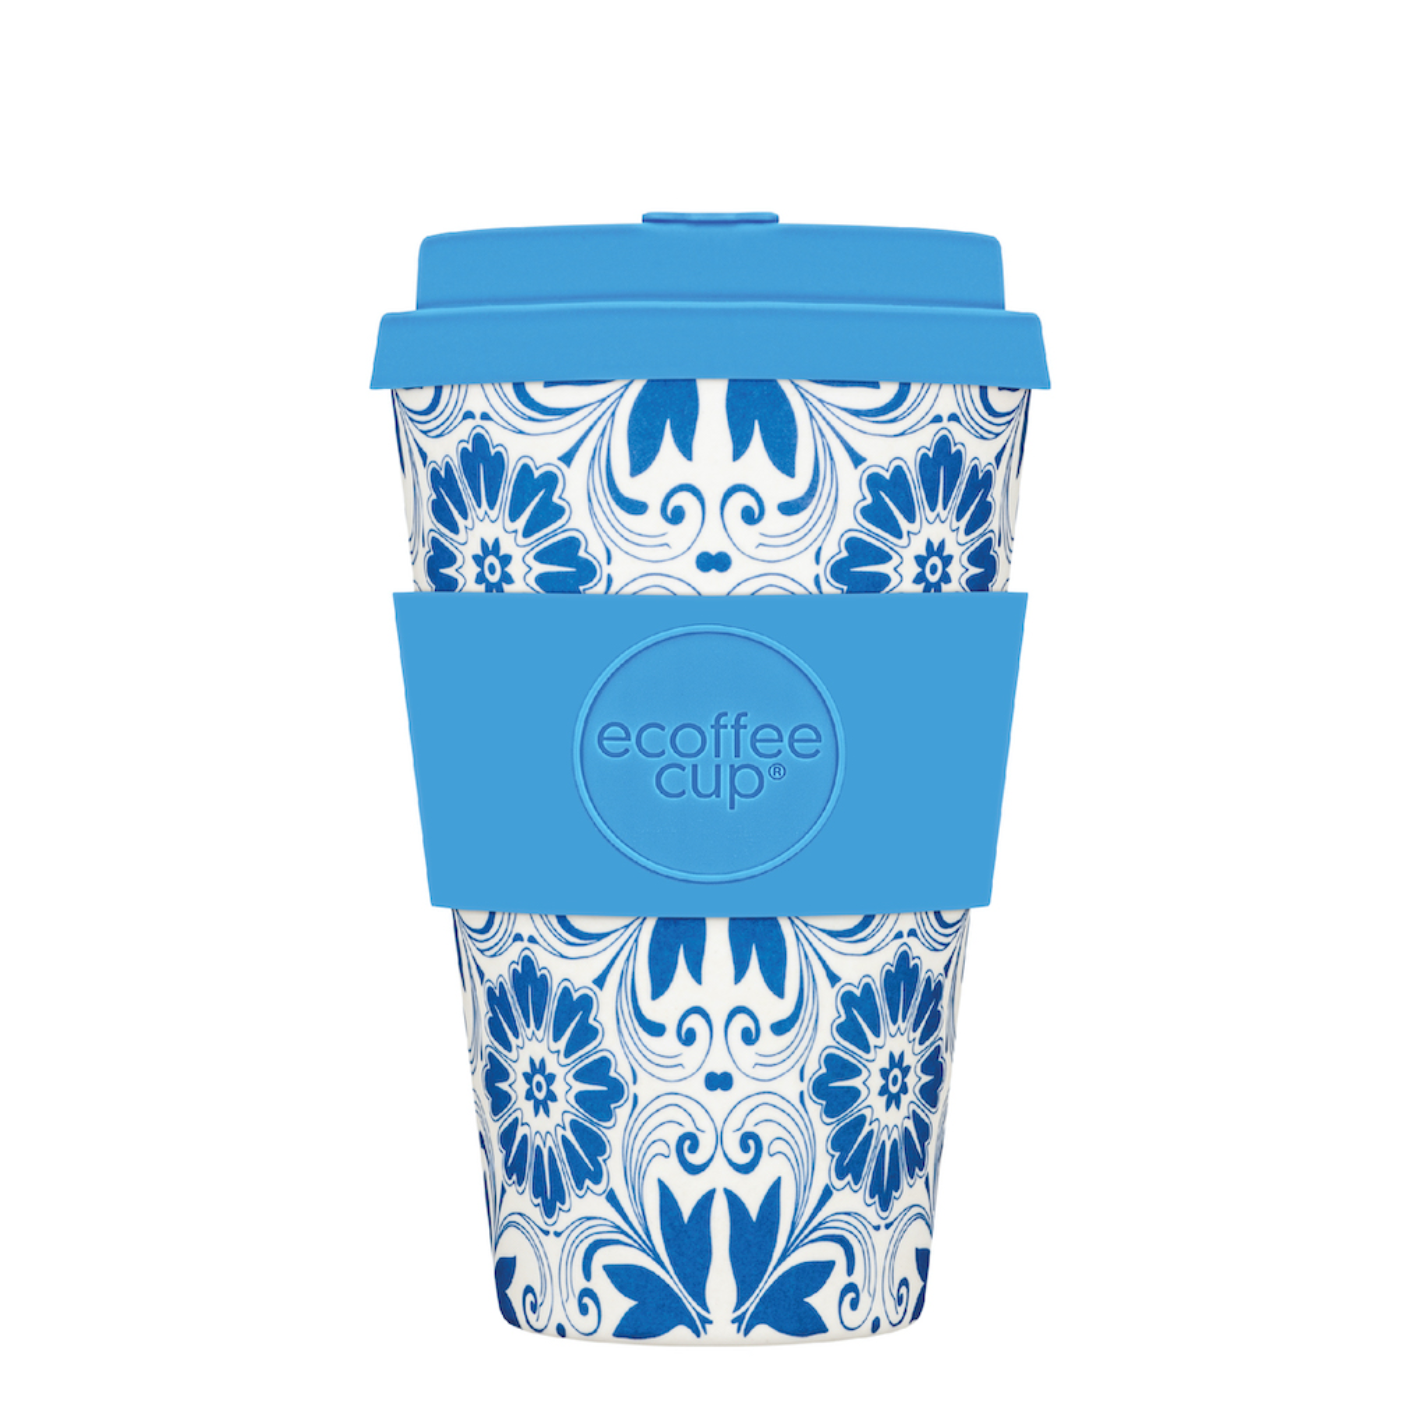 Ecoffee Cup Bamboo Fibre Takeaway Cup Delft Touch 14oz 400ml Singapore